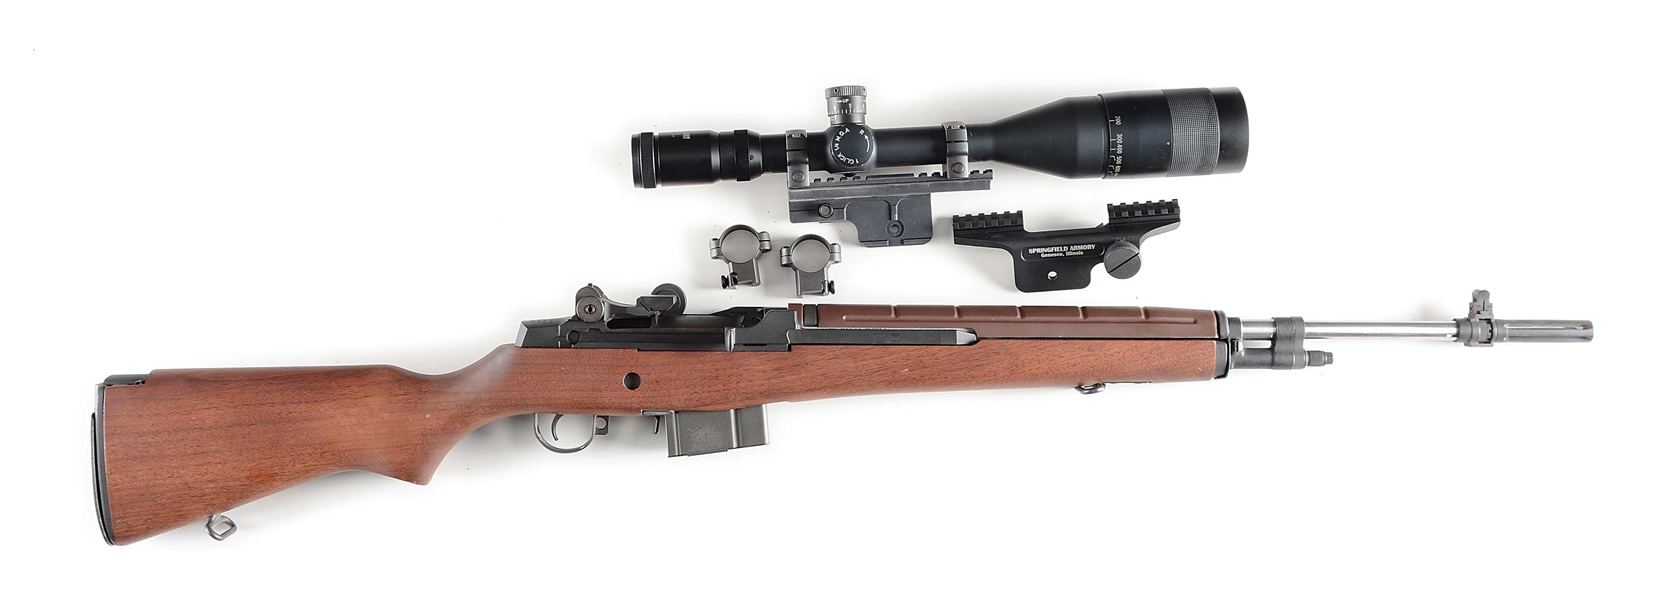 (M) USED SPRINGFIELD ARMORY M1A WITH SPRINGFIELD ARMORY SCOPE MOUNT AND SPRINGFIELD ARMORY 6-20X56 FFP MIL-DOT SCOPE.